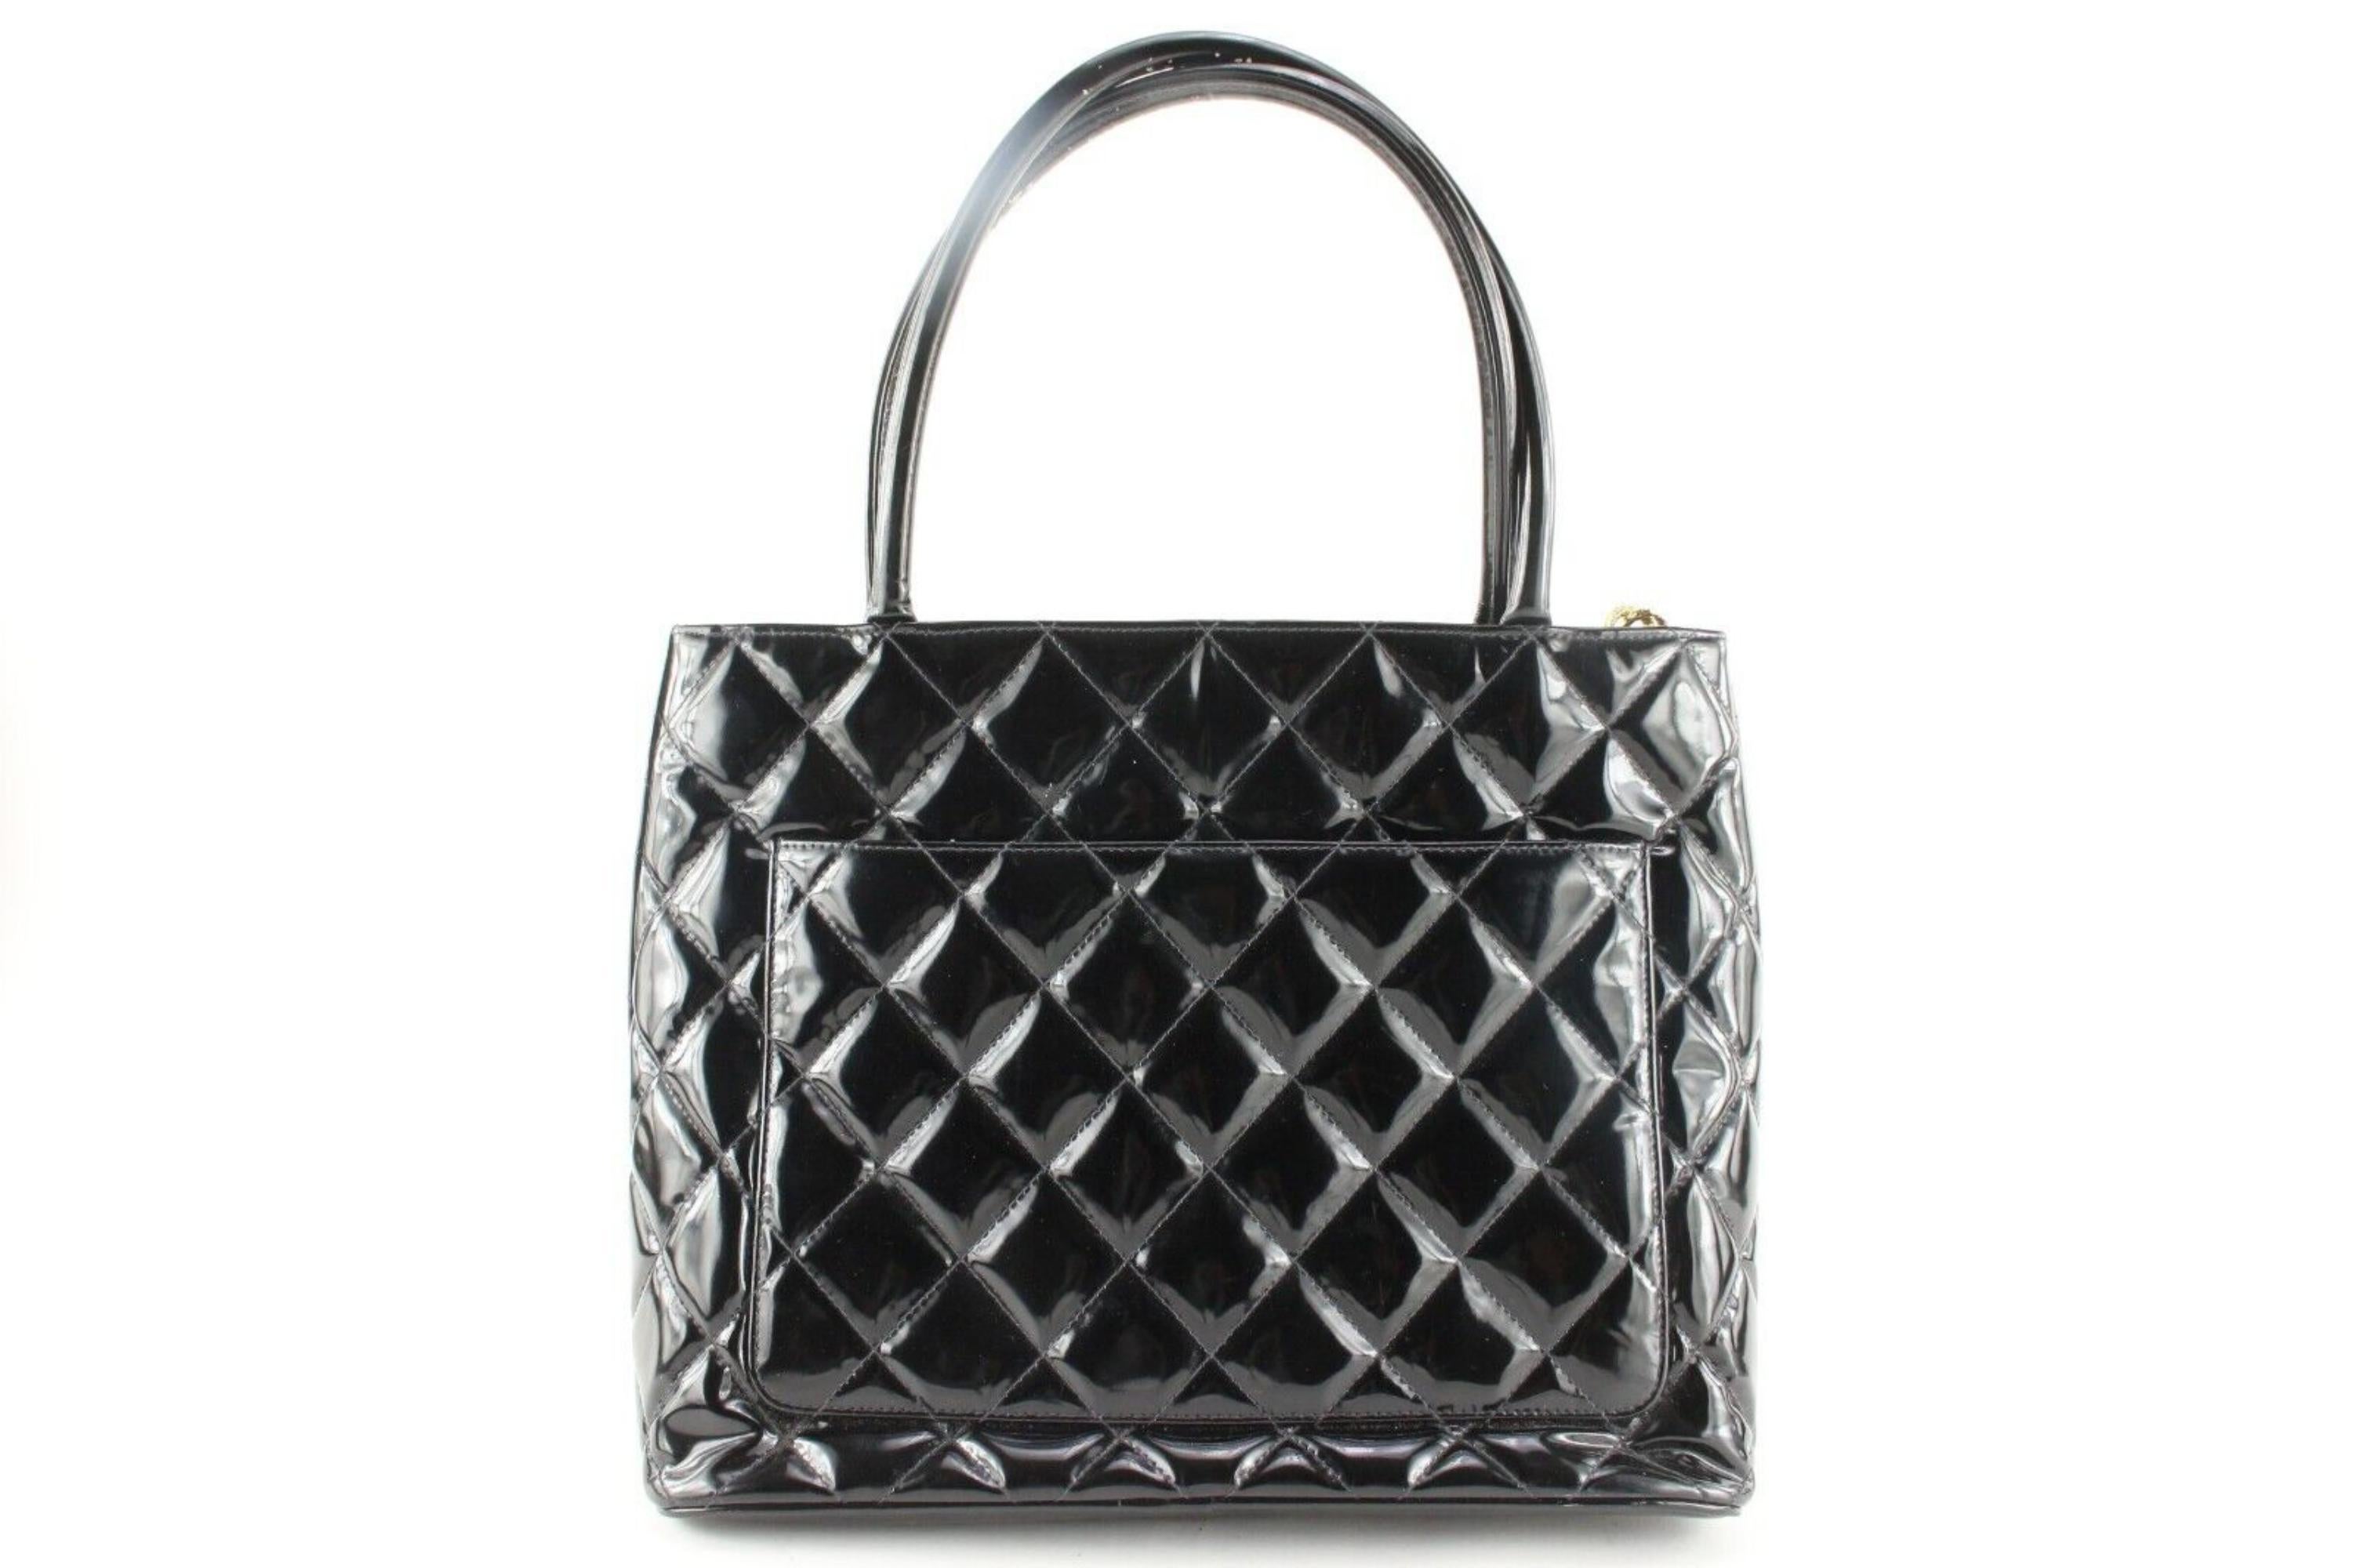 Chanel Black Quilted Patent Medallion Zip Tote GHW 3CK0418
Date Code/Serial Number: 7664338

Made In: France

Measurements: Length:  12